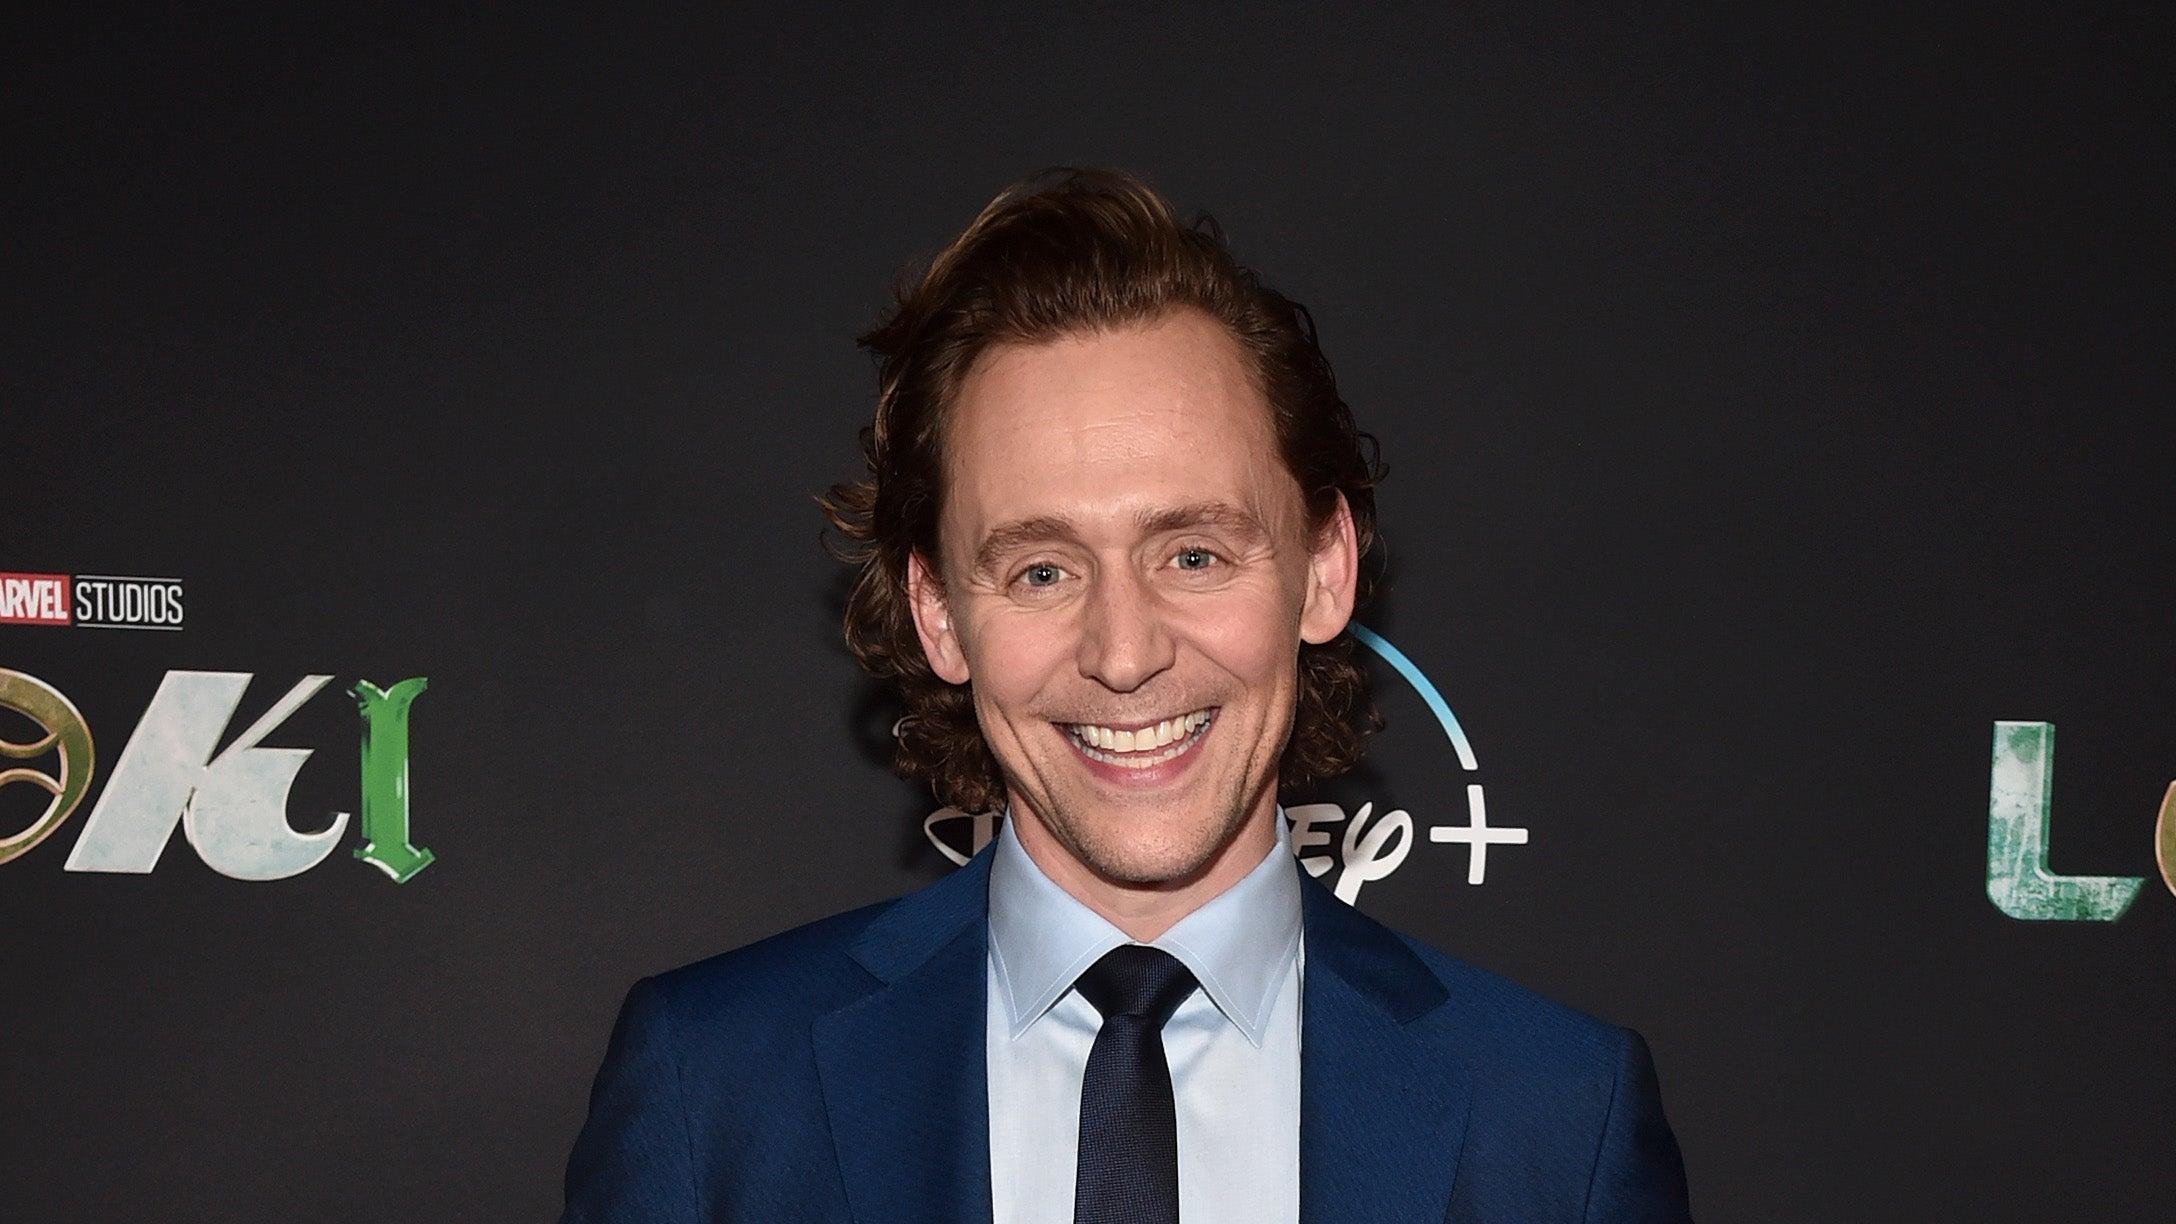 Tom Hiddleston on Loki being bisexual: “It was an honor to bring that up”